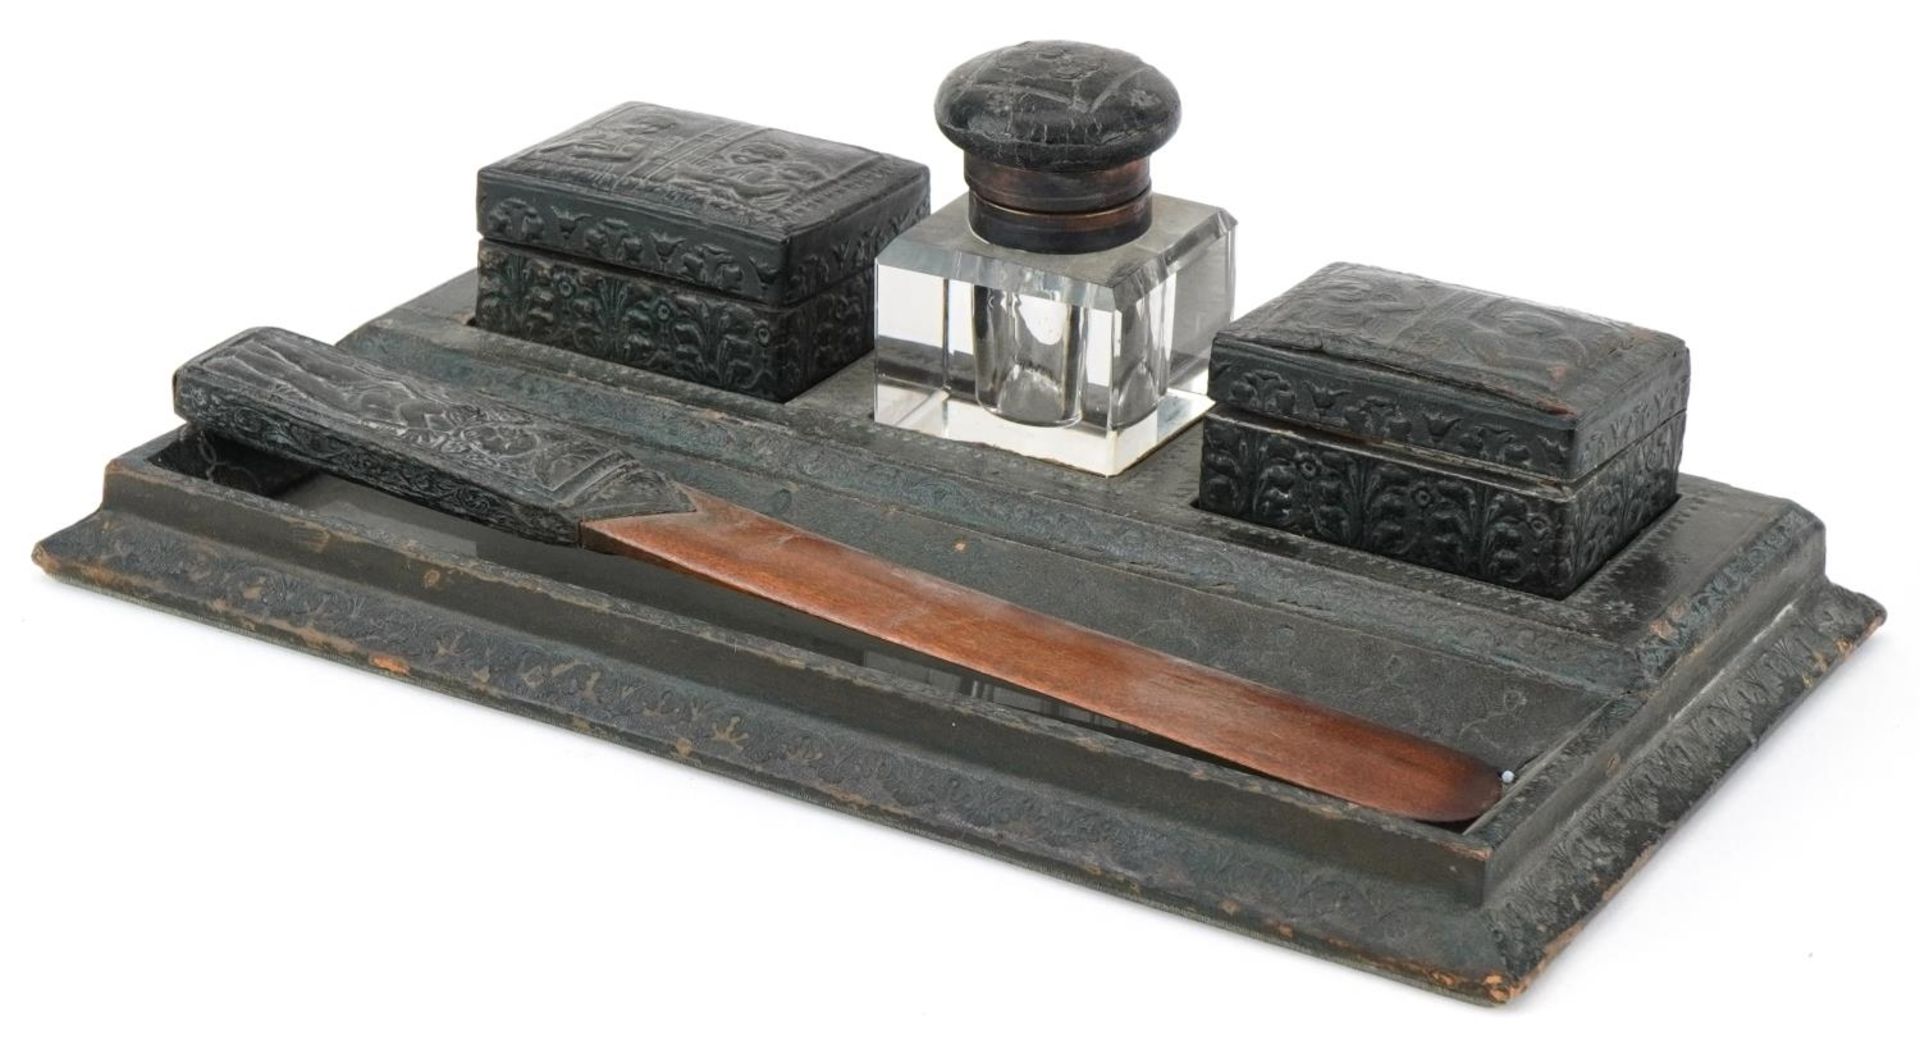 19th century European leather desk stand with two boxes, inkwell and letter opener embossed with